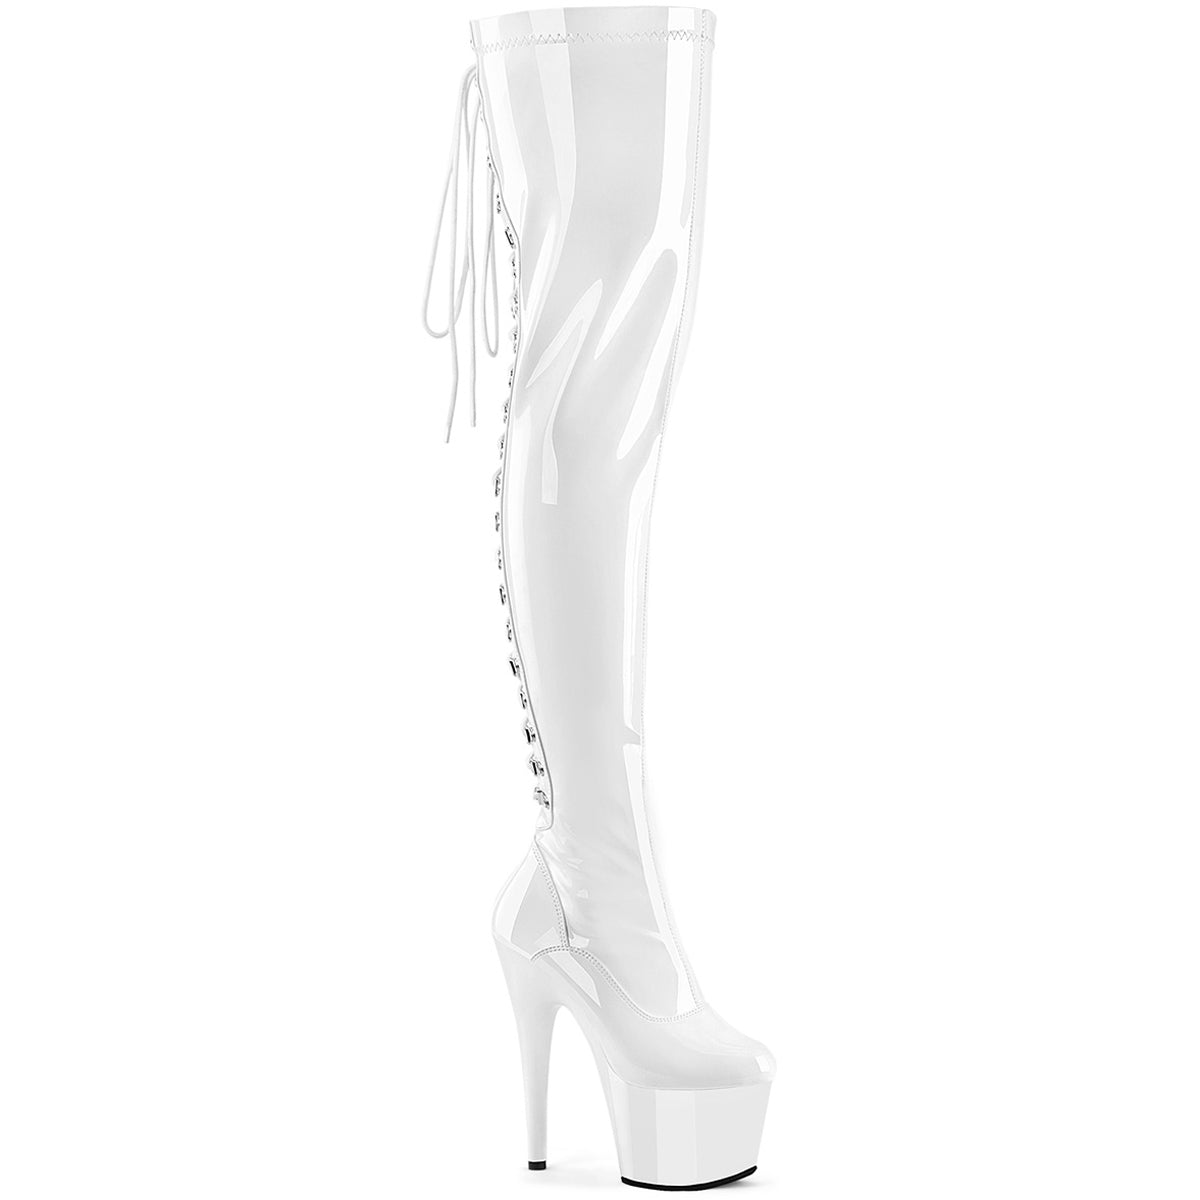 7" Heel, 2 3/4" Pf Lace-Up Back Stretch Thigh Boot, Side Zip Pleaser Pleaser ADORE/3063